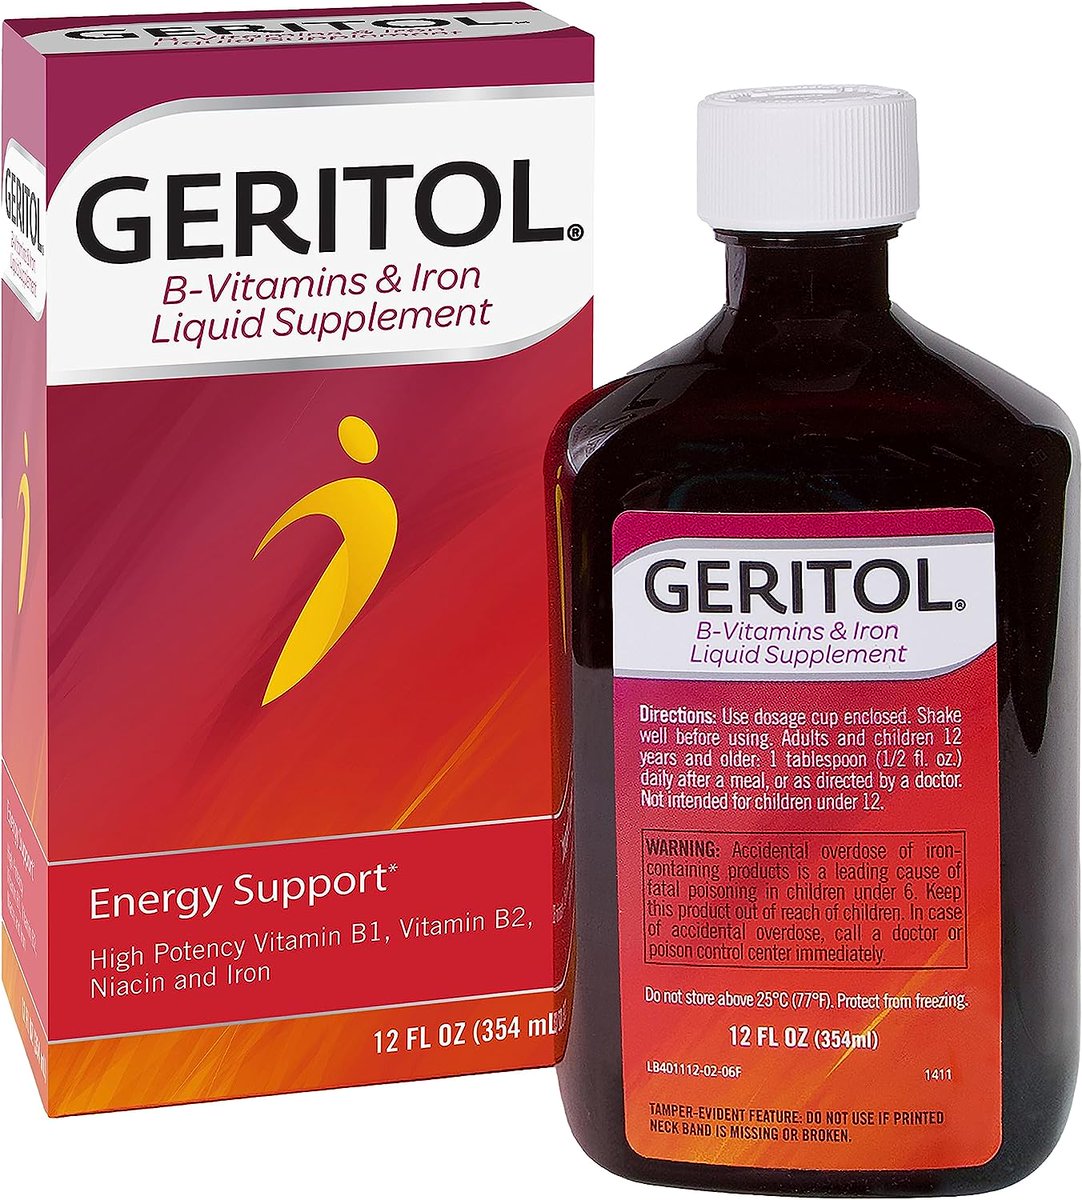 #Geritol #multivitamine #Bvitamin #HealthTips #vitamin #Jamaican  Give yourself a boost and get energy support when you need it with Geritol liquid iron and multivitamin supplement for women and men.